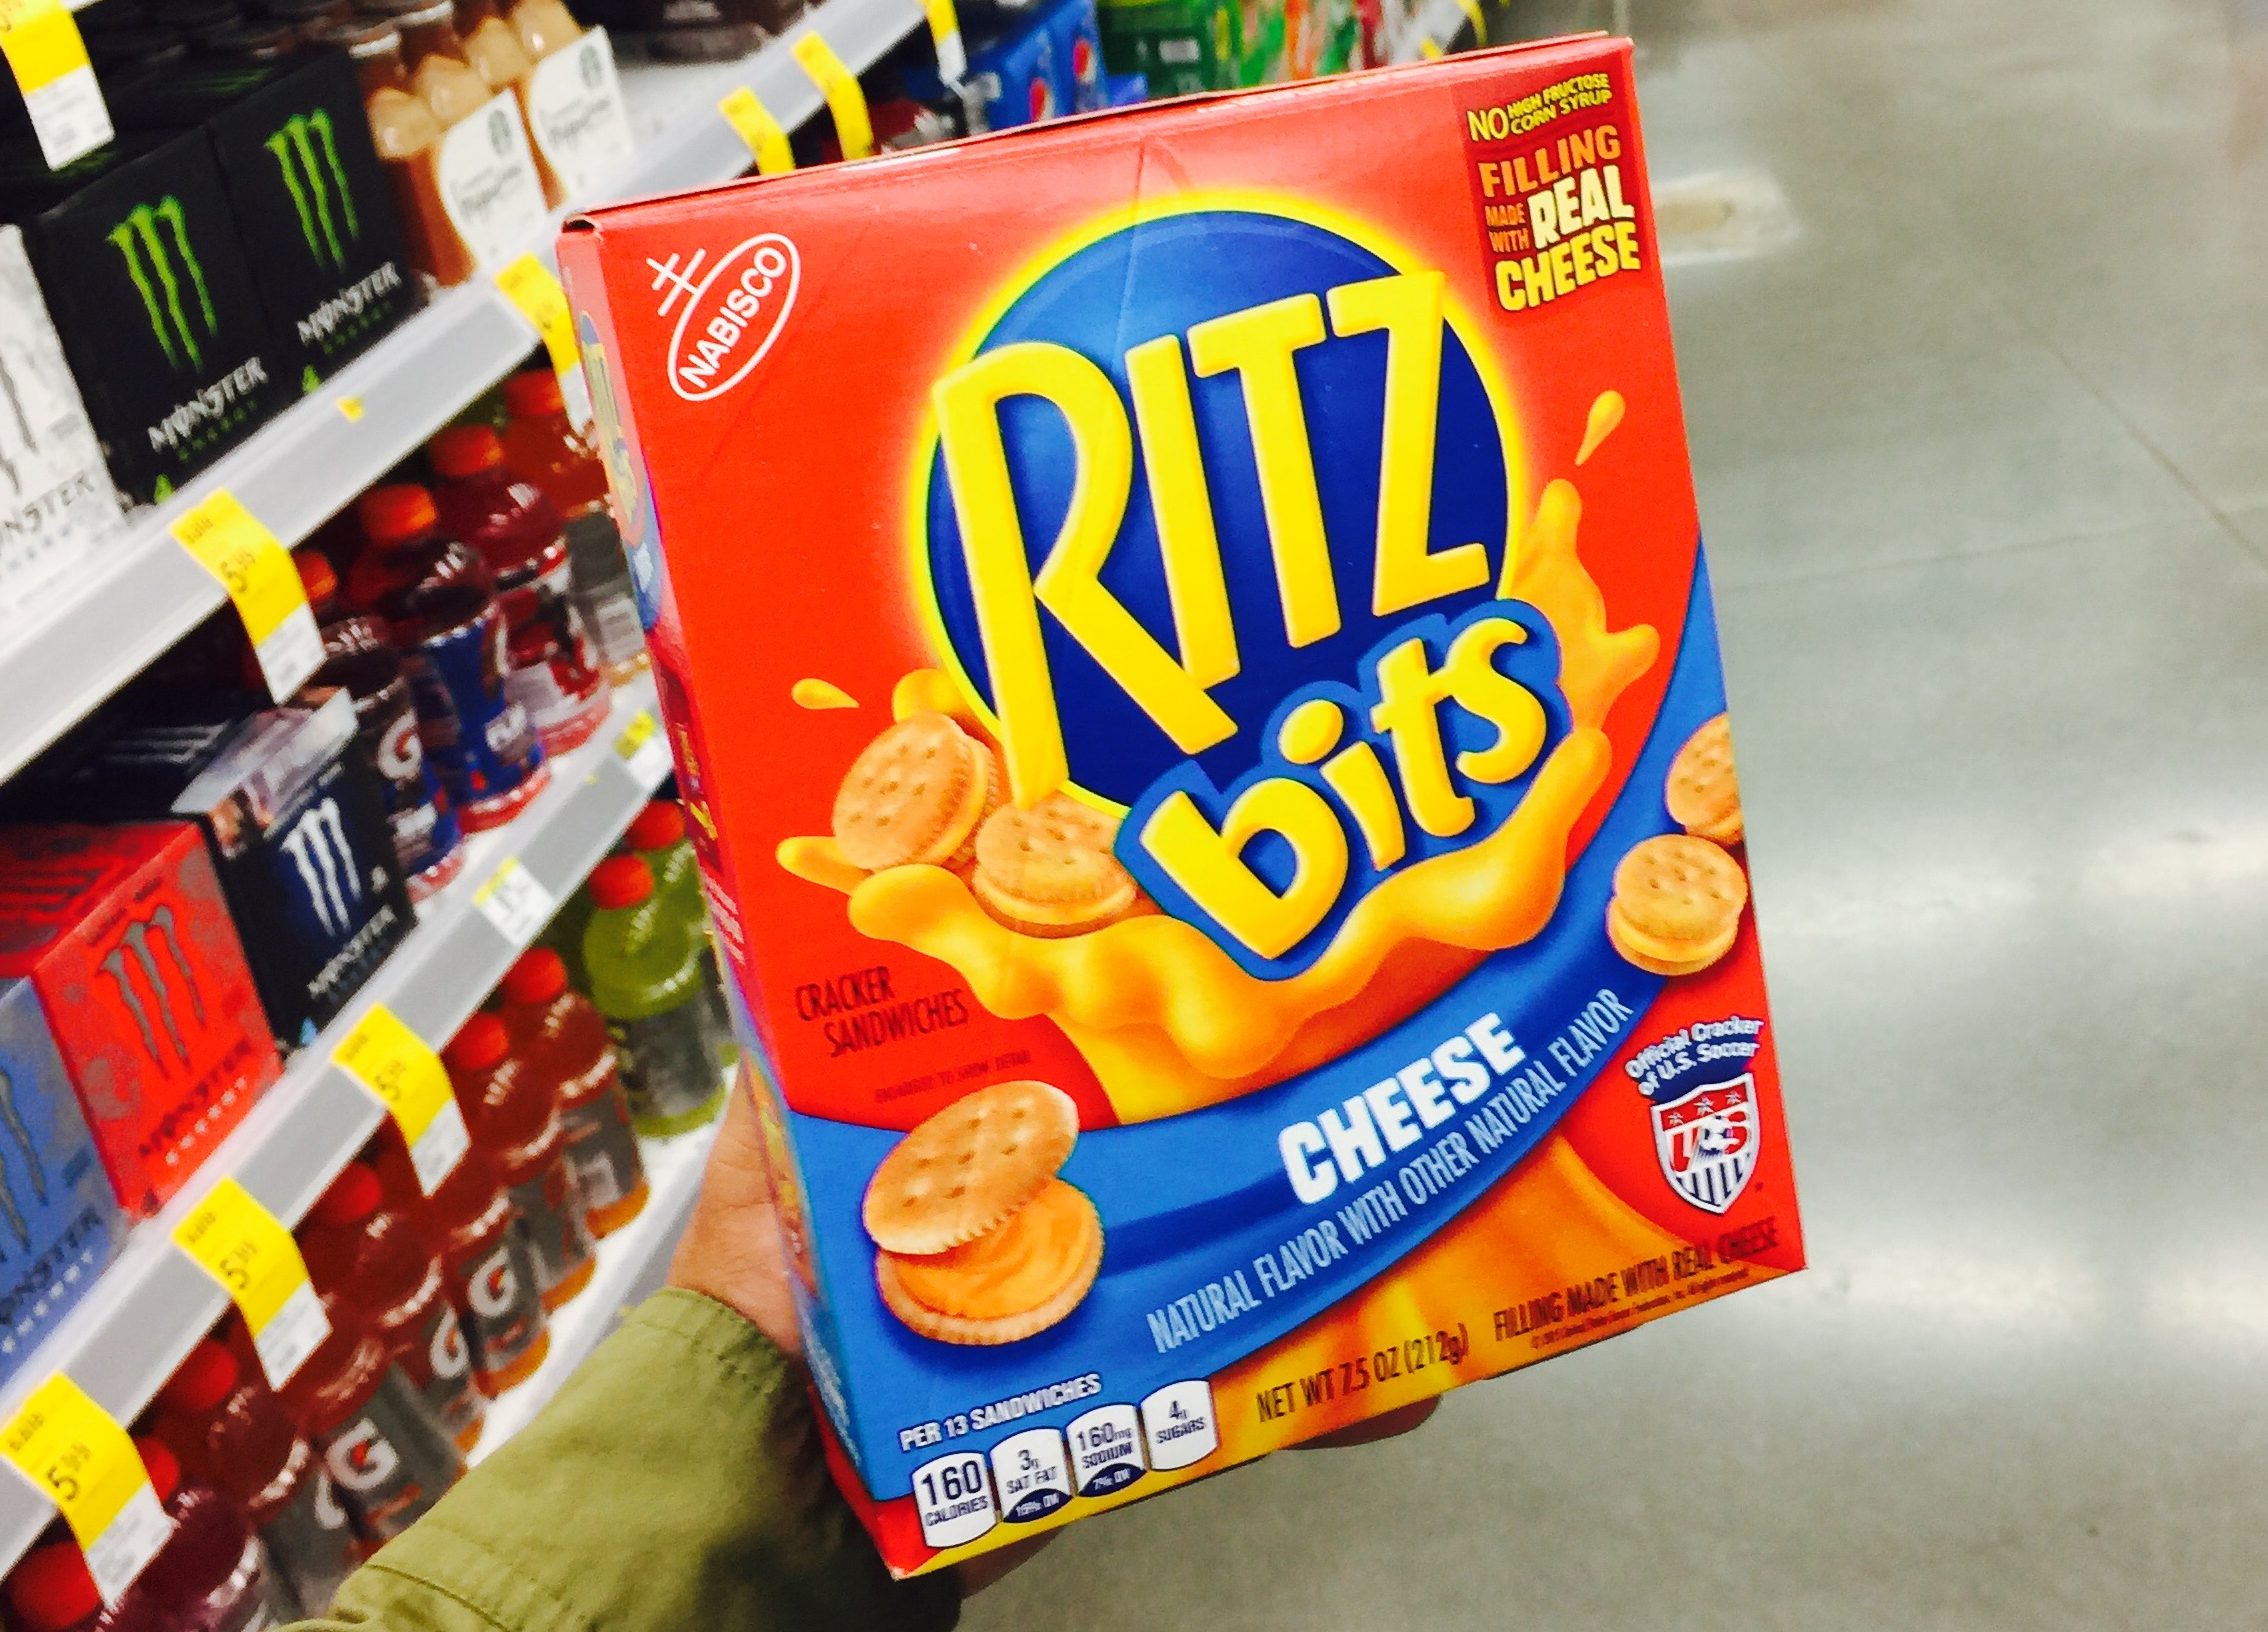 ritz crackers recalled due to possible salmonella – Ritz bits cheese